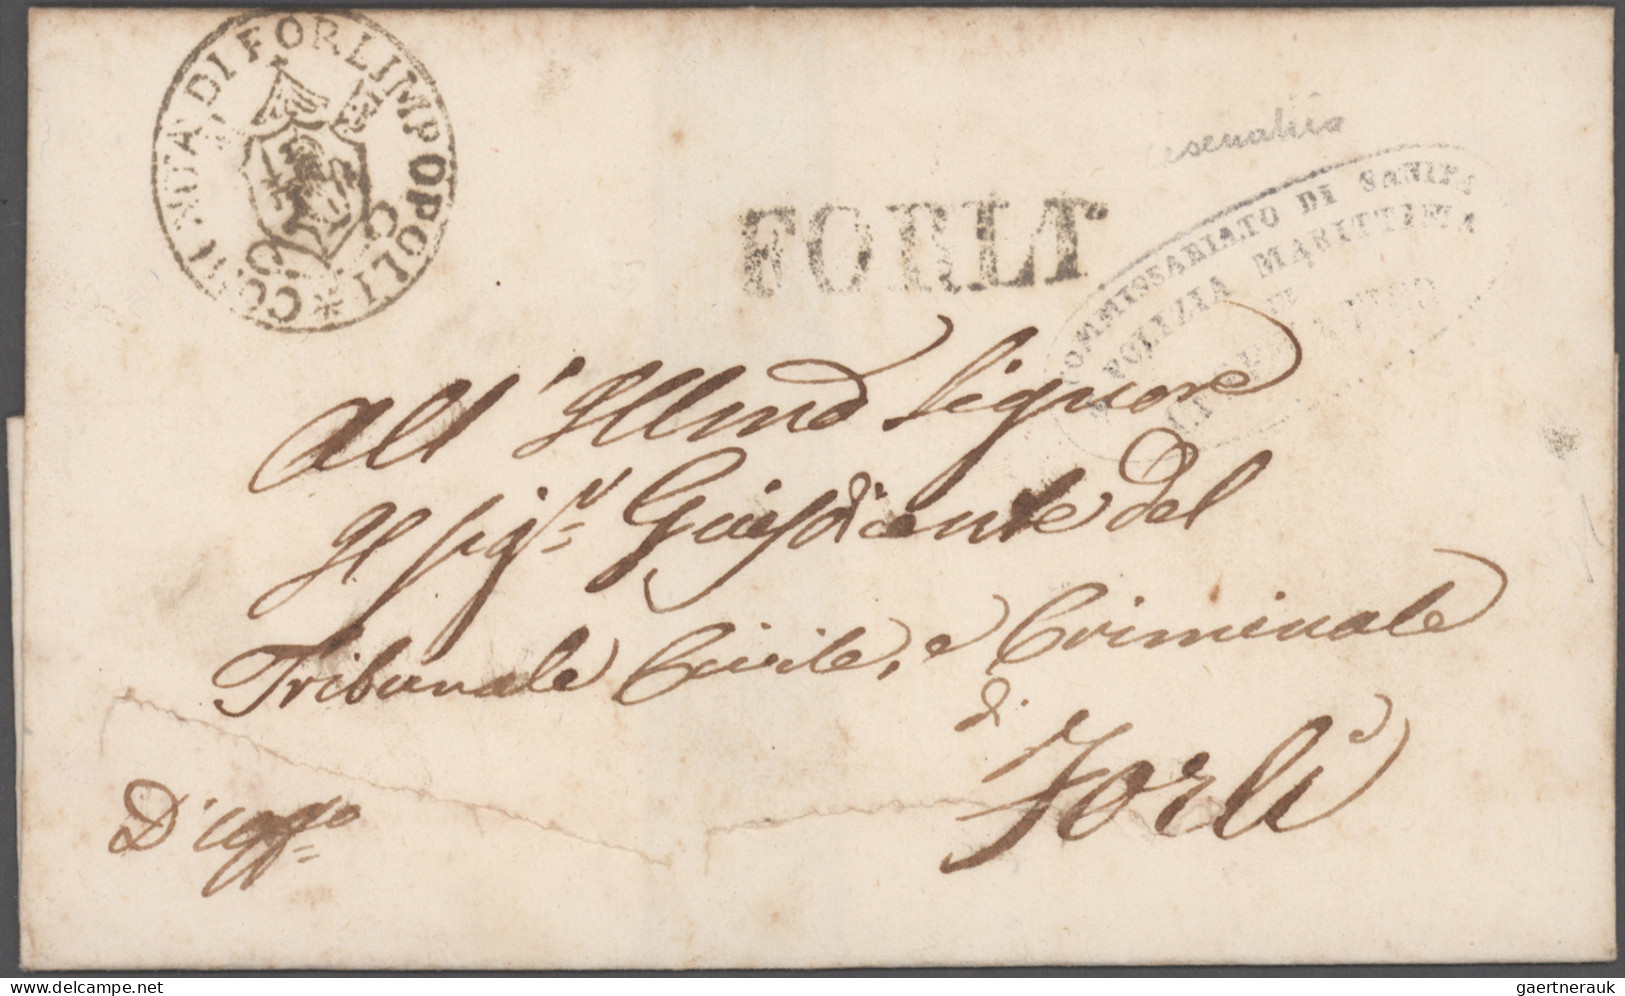 Disinfection Mail: 1716/1911, extraordinary exhibit collection of 52 disinfected